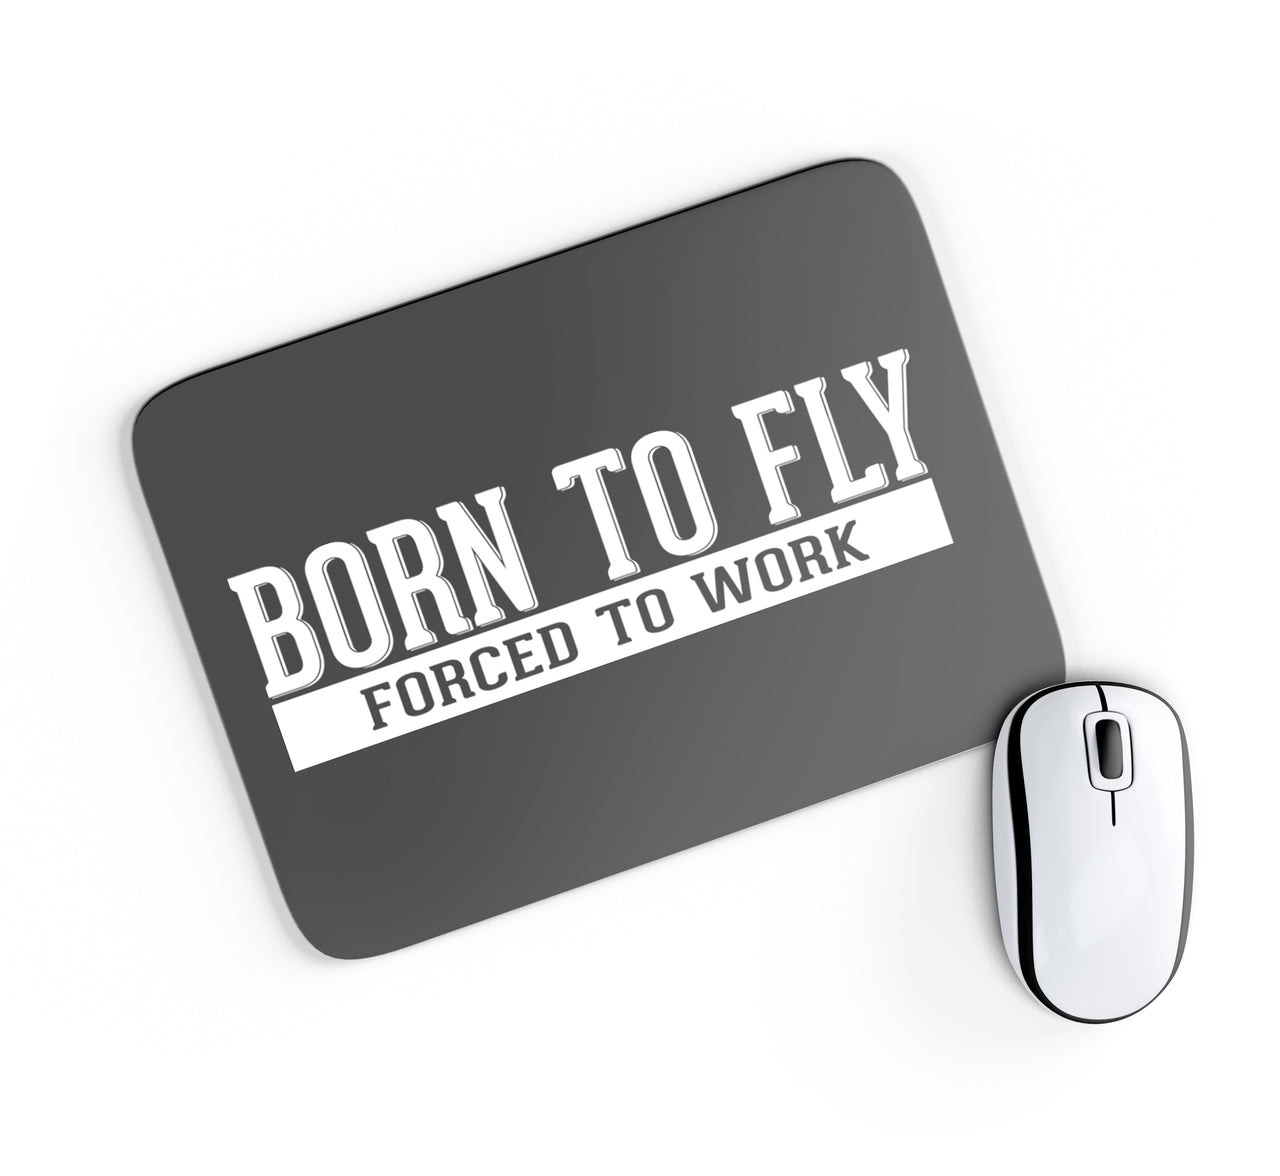 Born To Fly Forced To Work Designed Mouse Pads